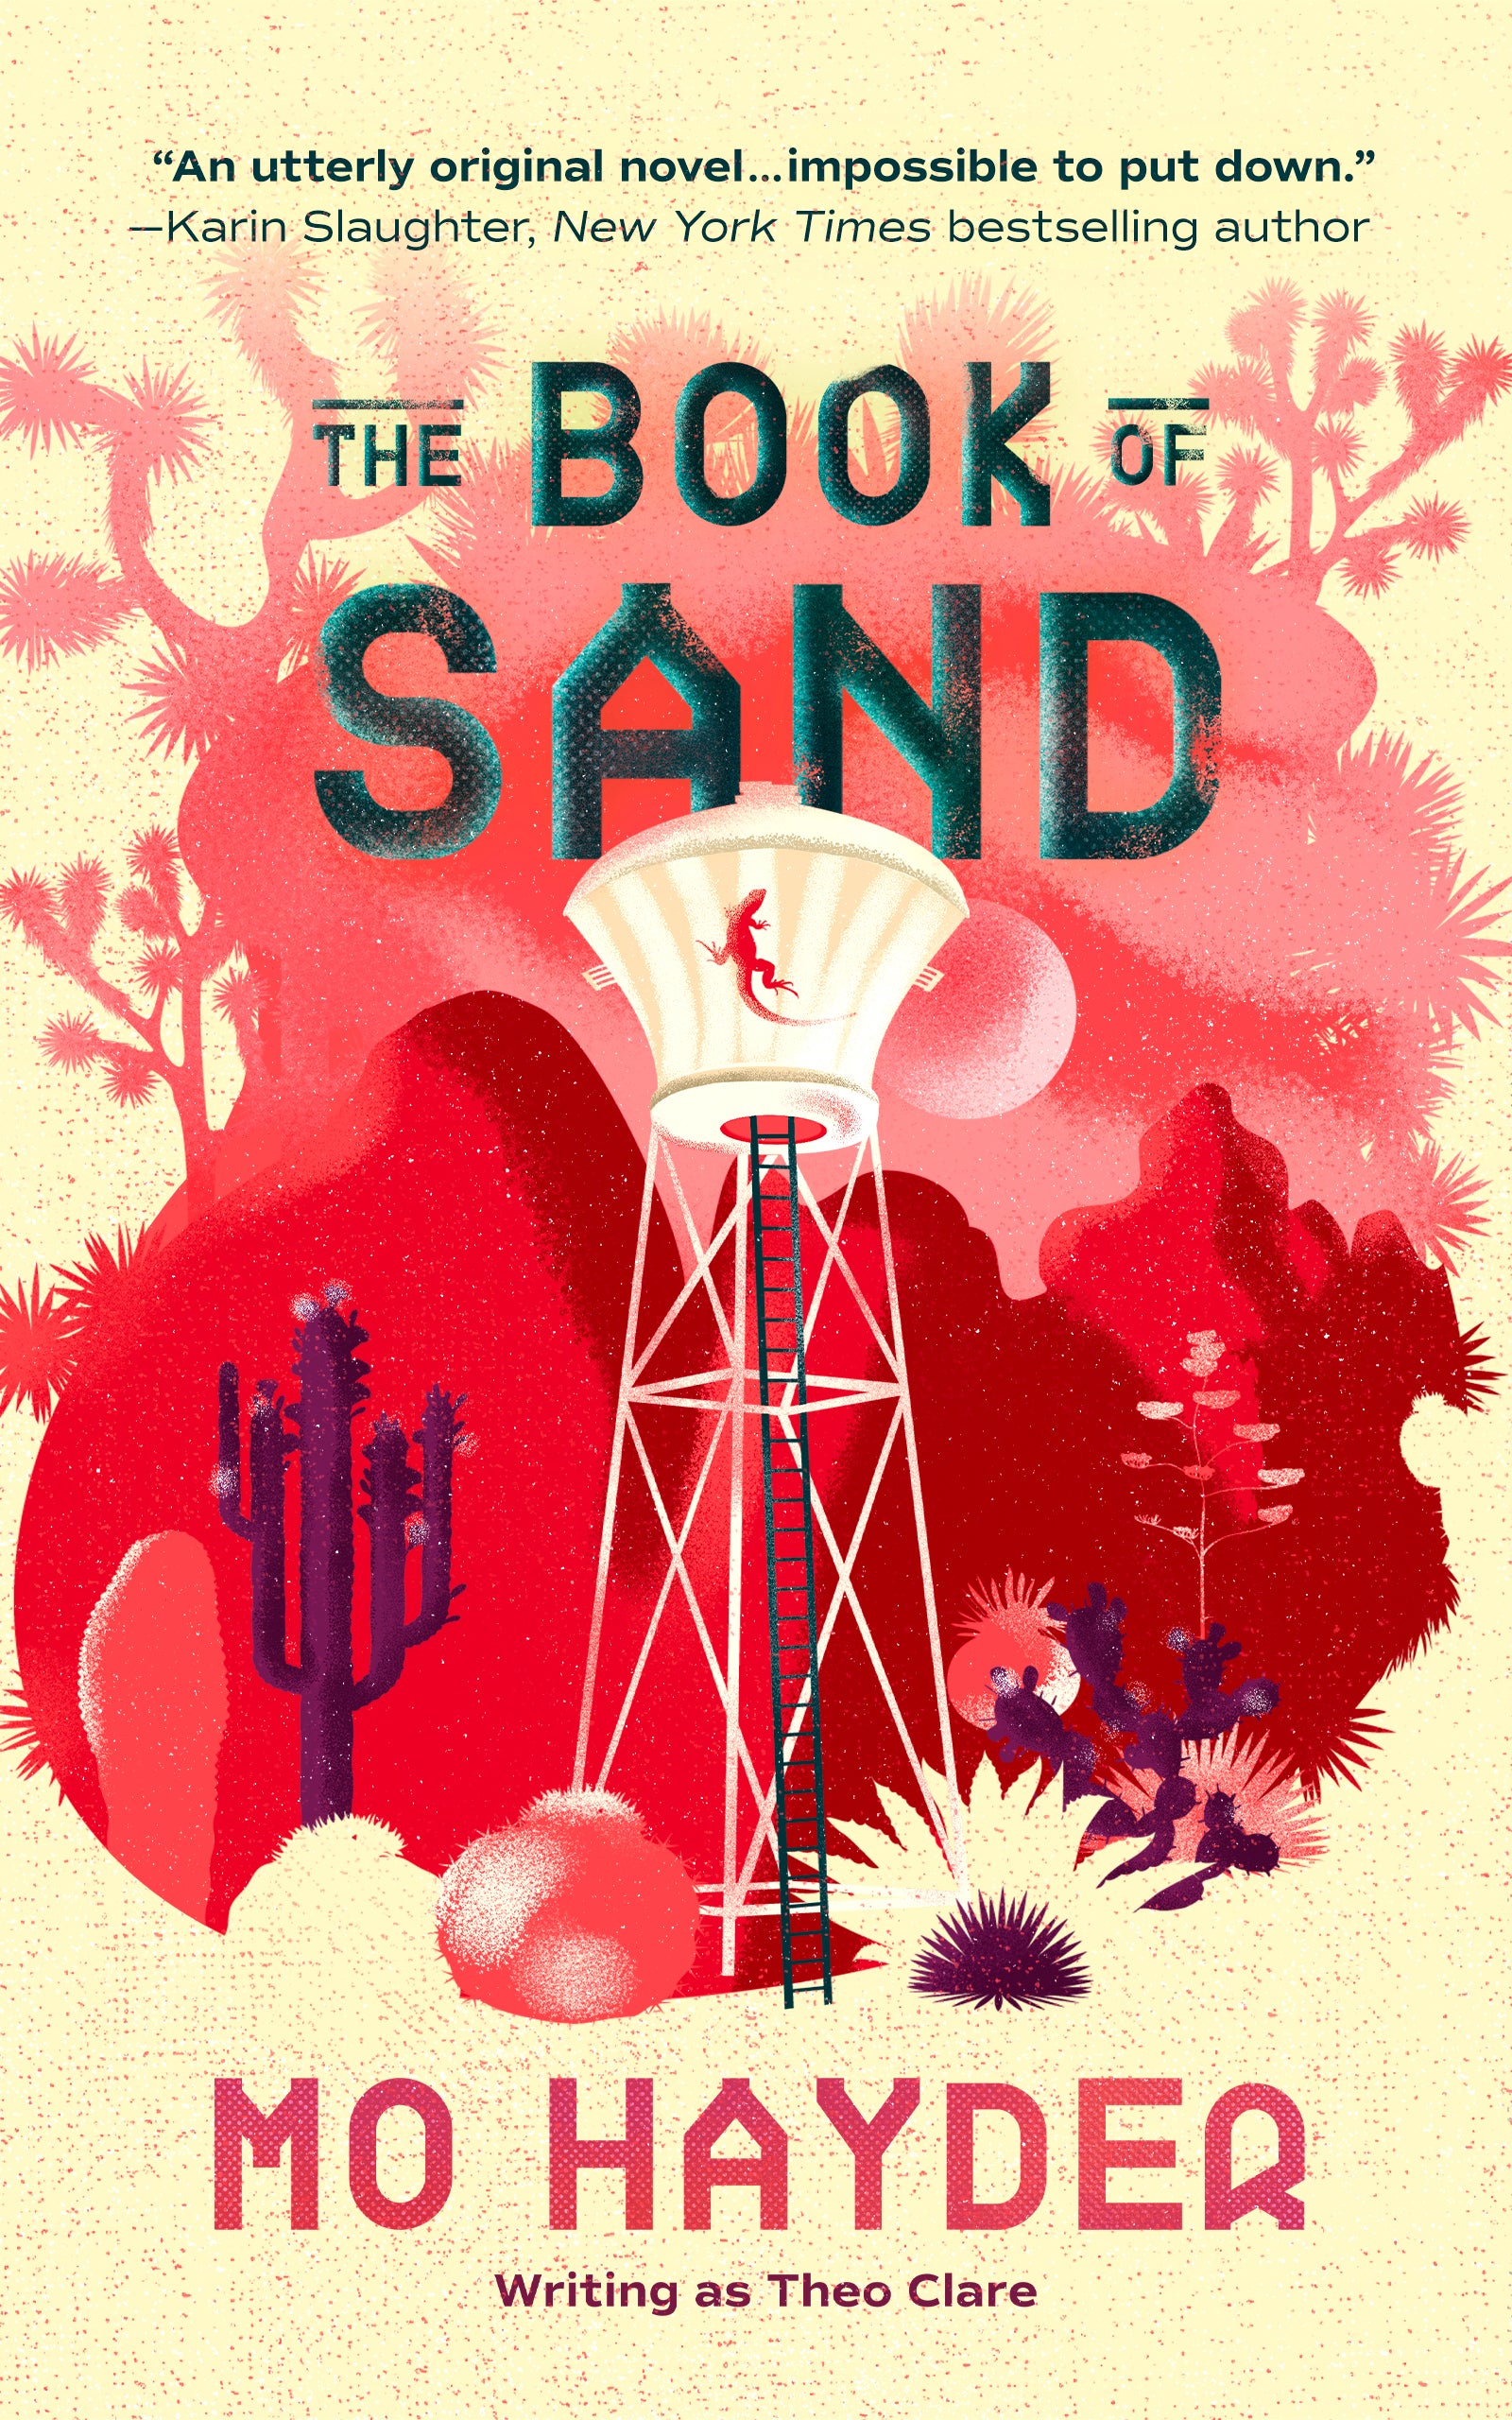 The Book of Sand